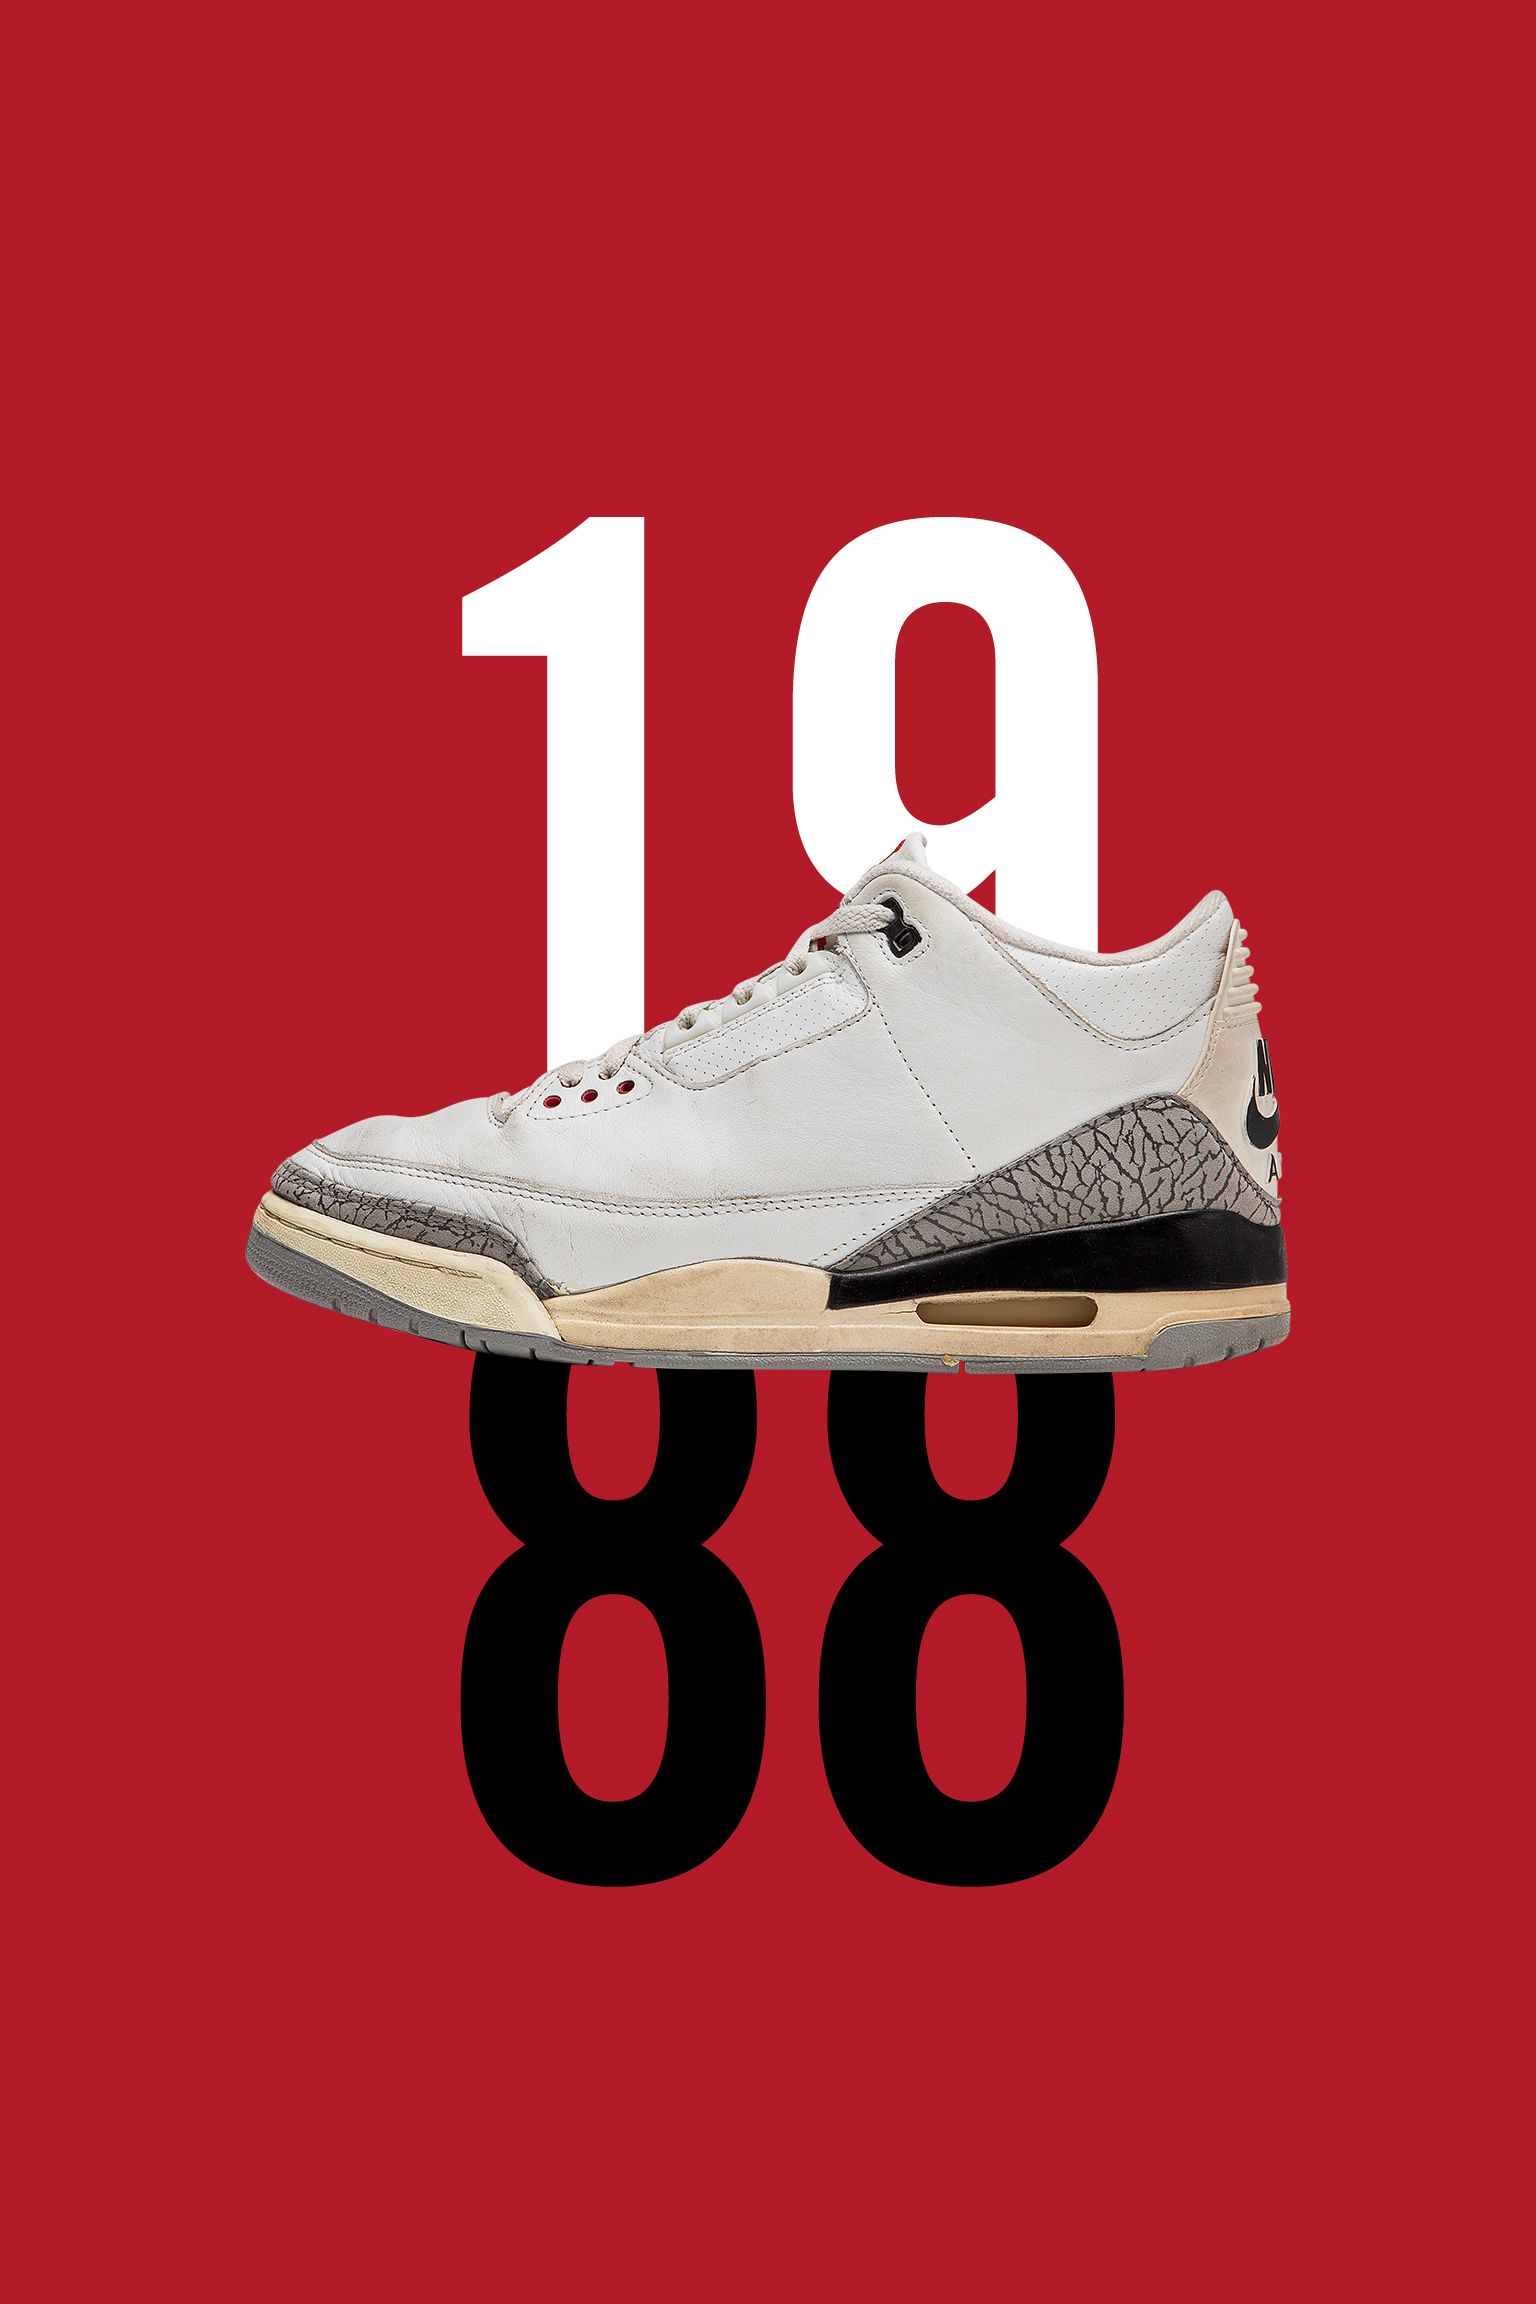 Day in SNKRS: The Free Throw Line Dunk. SNKRS